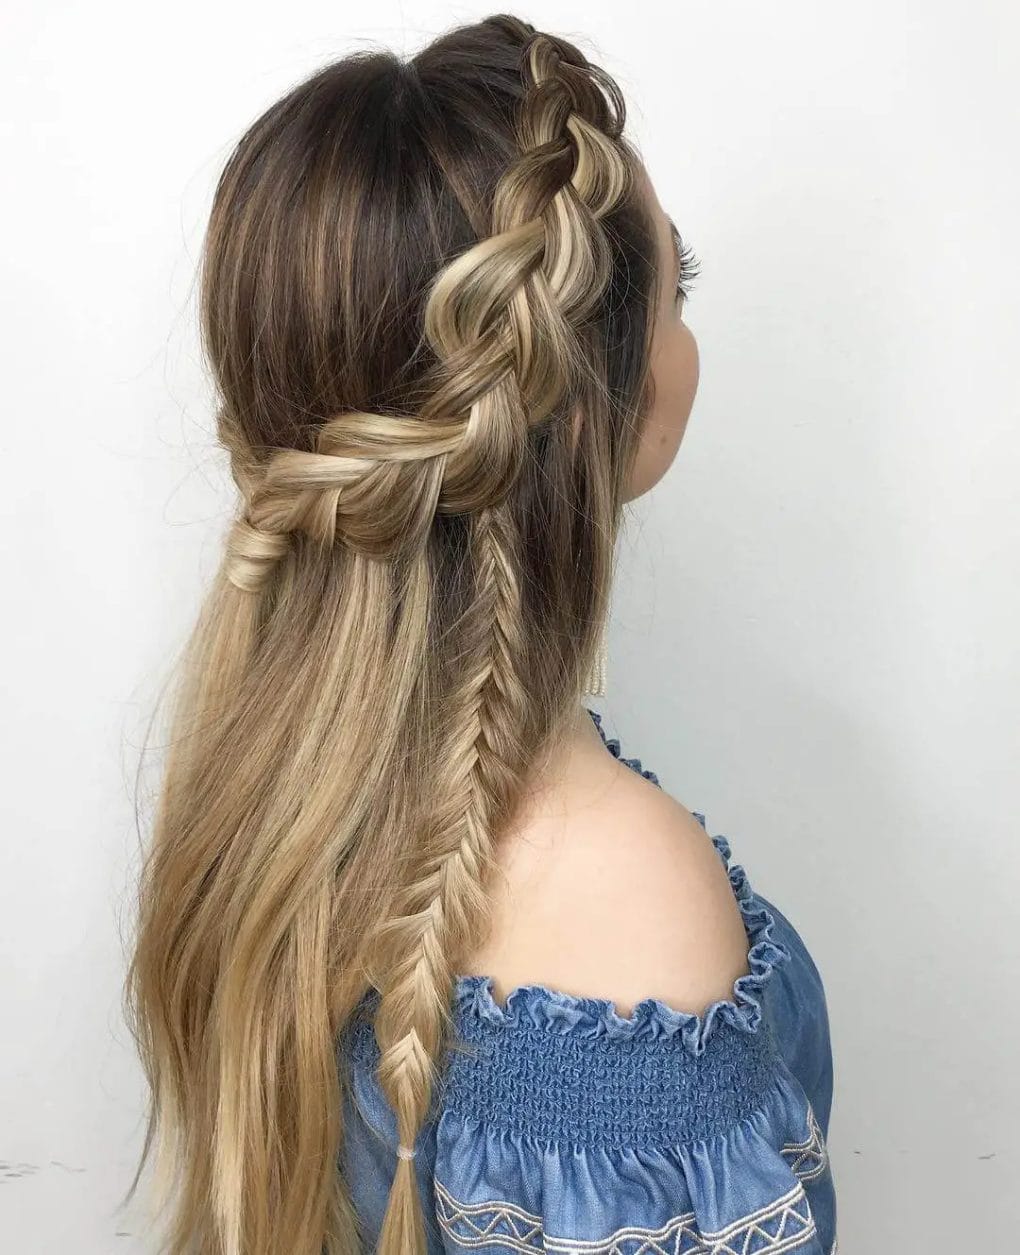 Multi-tonal blonde hair with a loose, side Viking braid and relaxed waves.